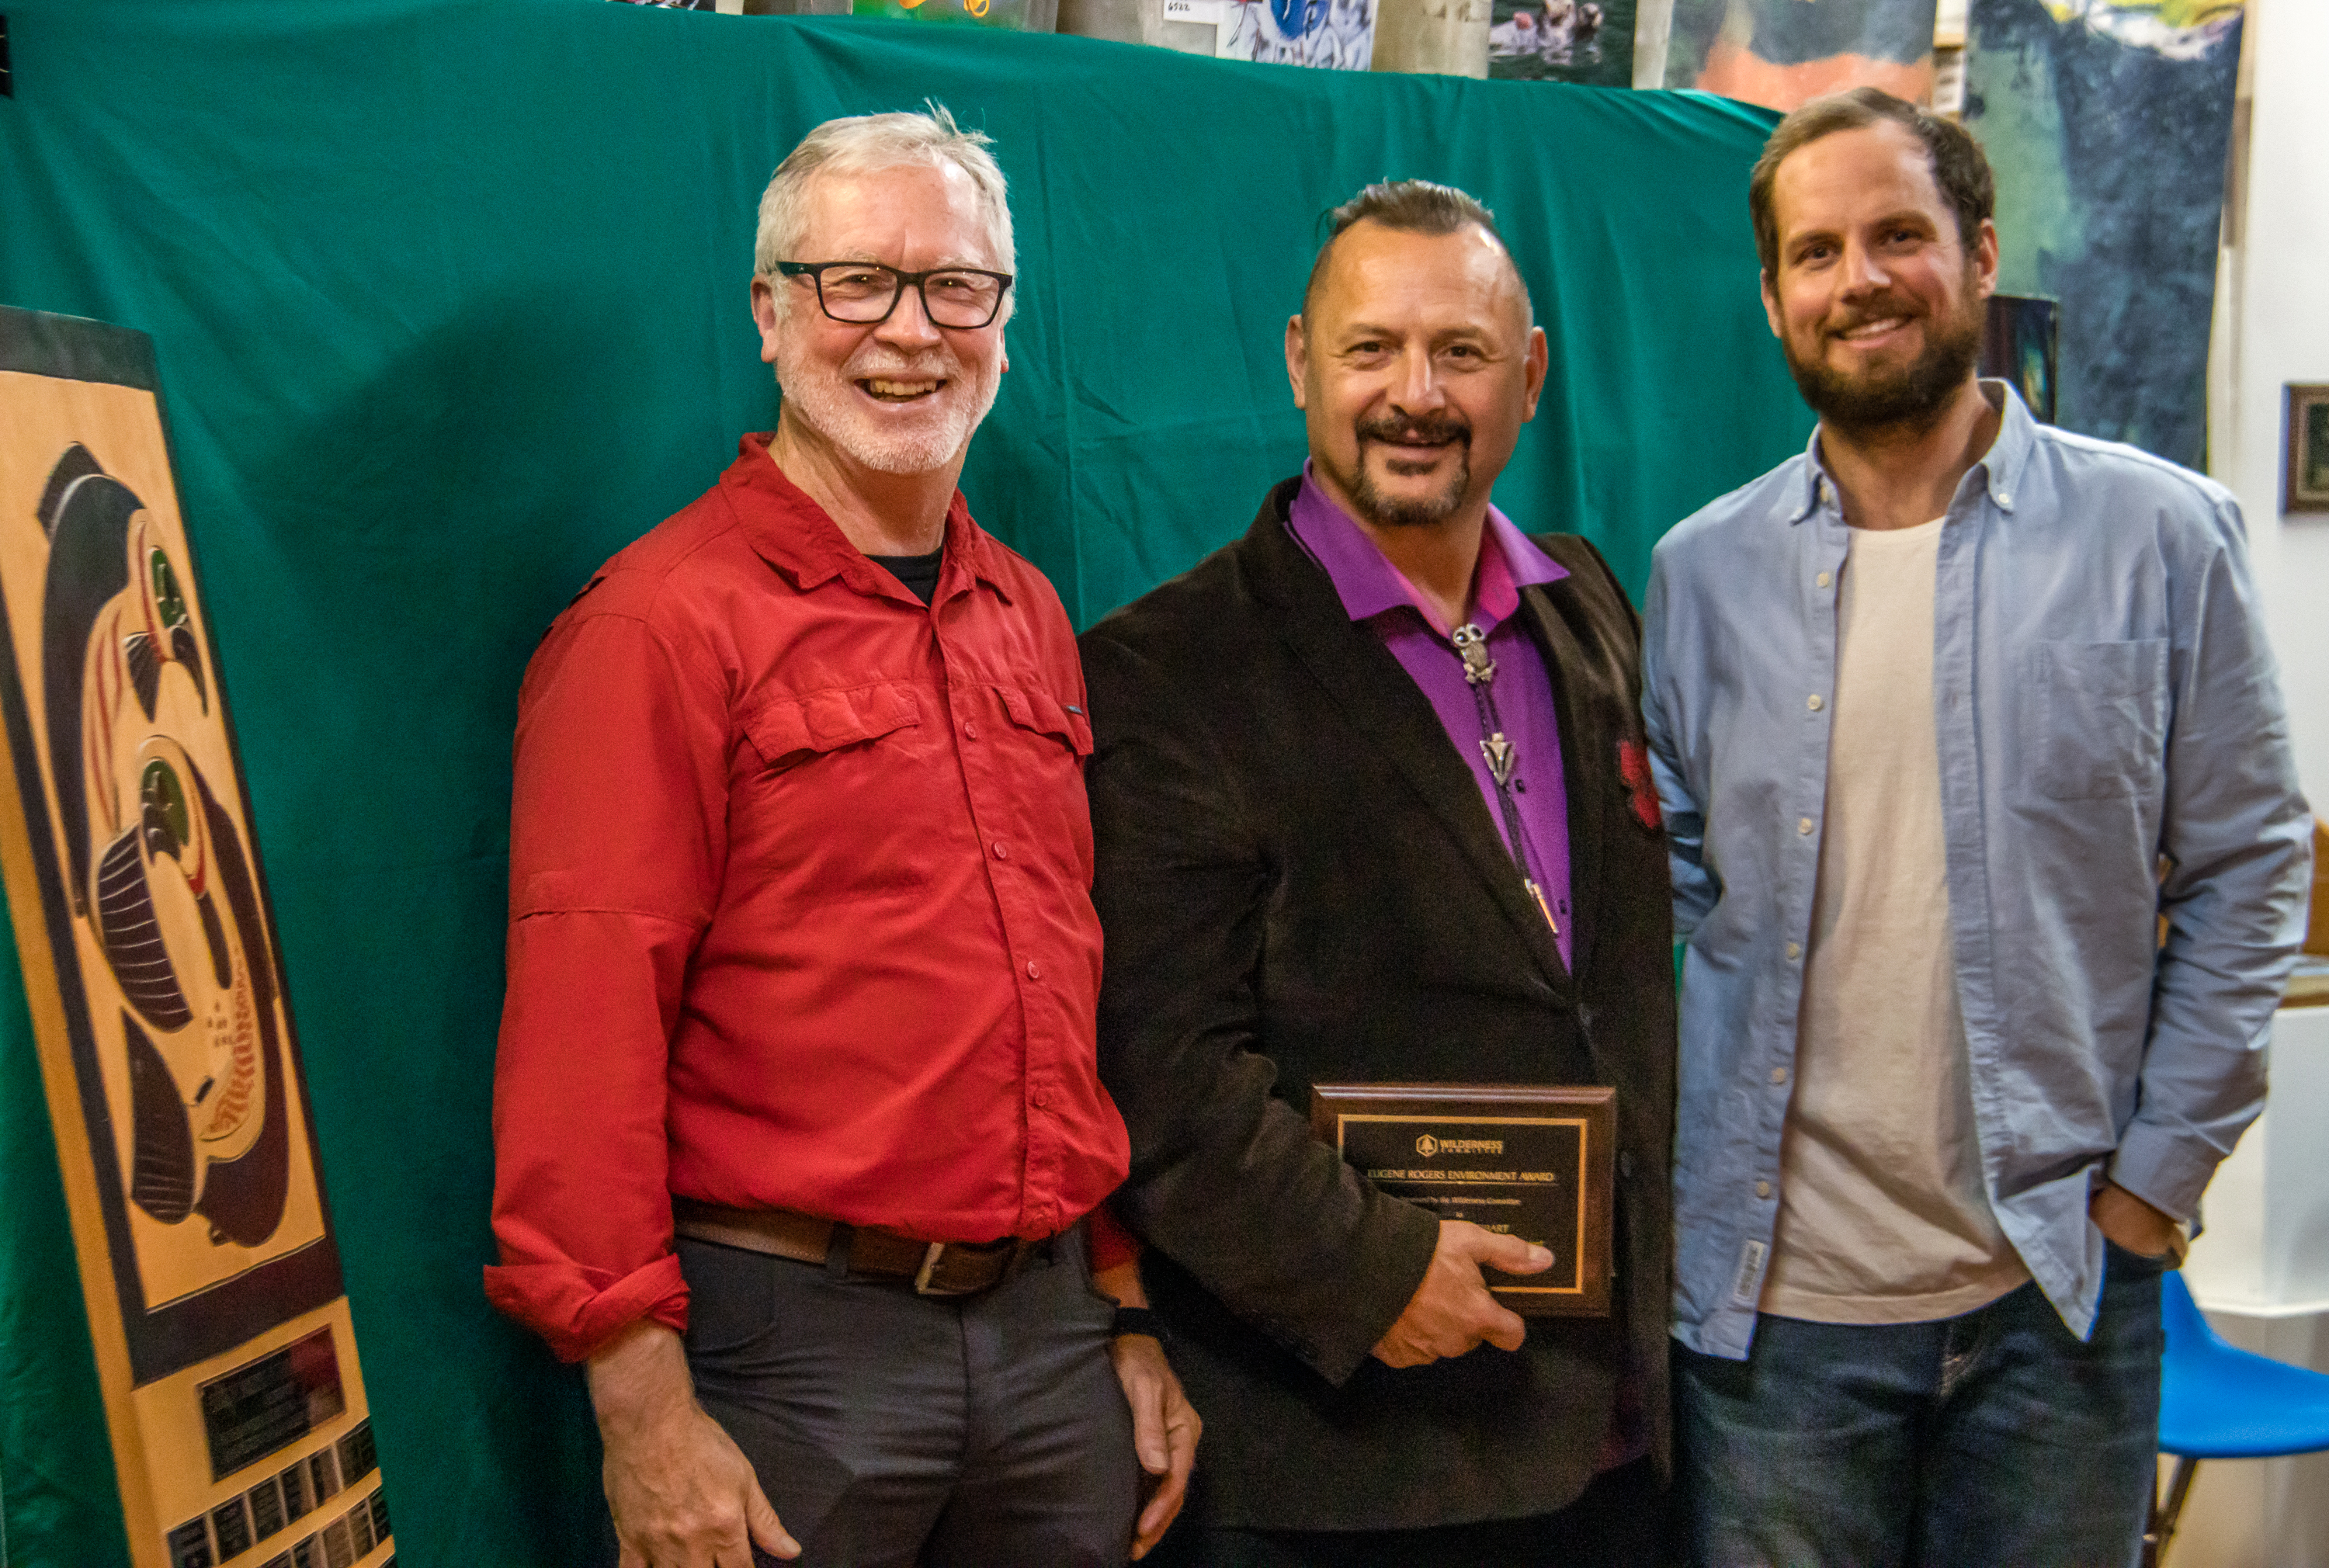 Chief James Hobart standing with the Eugene Rogers Award with Joe Foy (left) and Kegan Pepper-Smith (right).